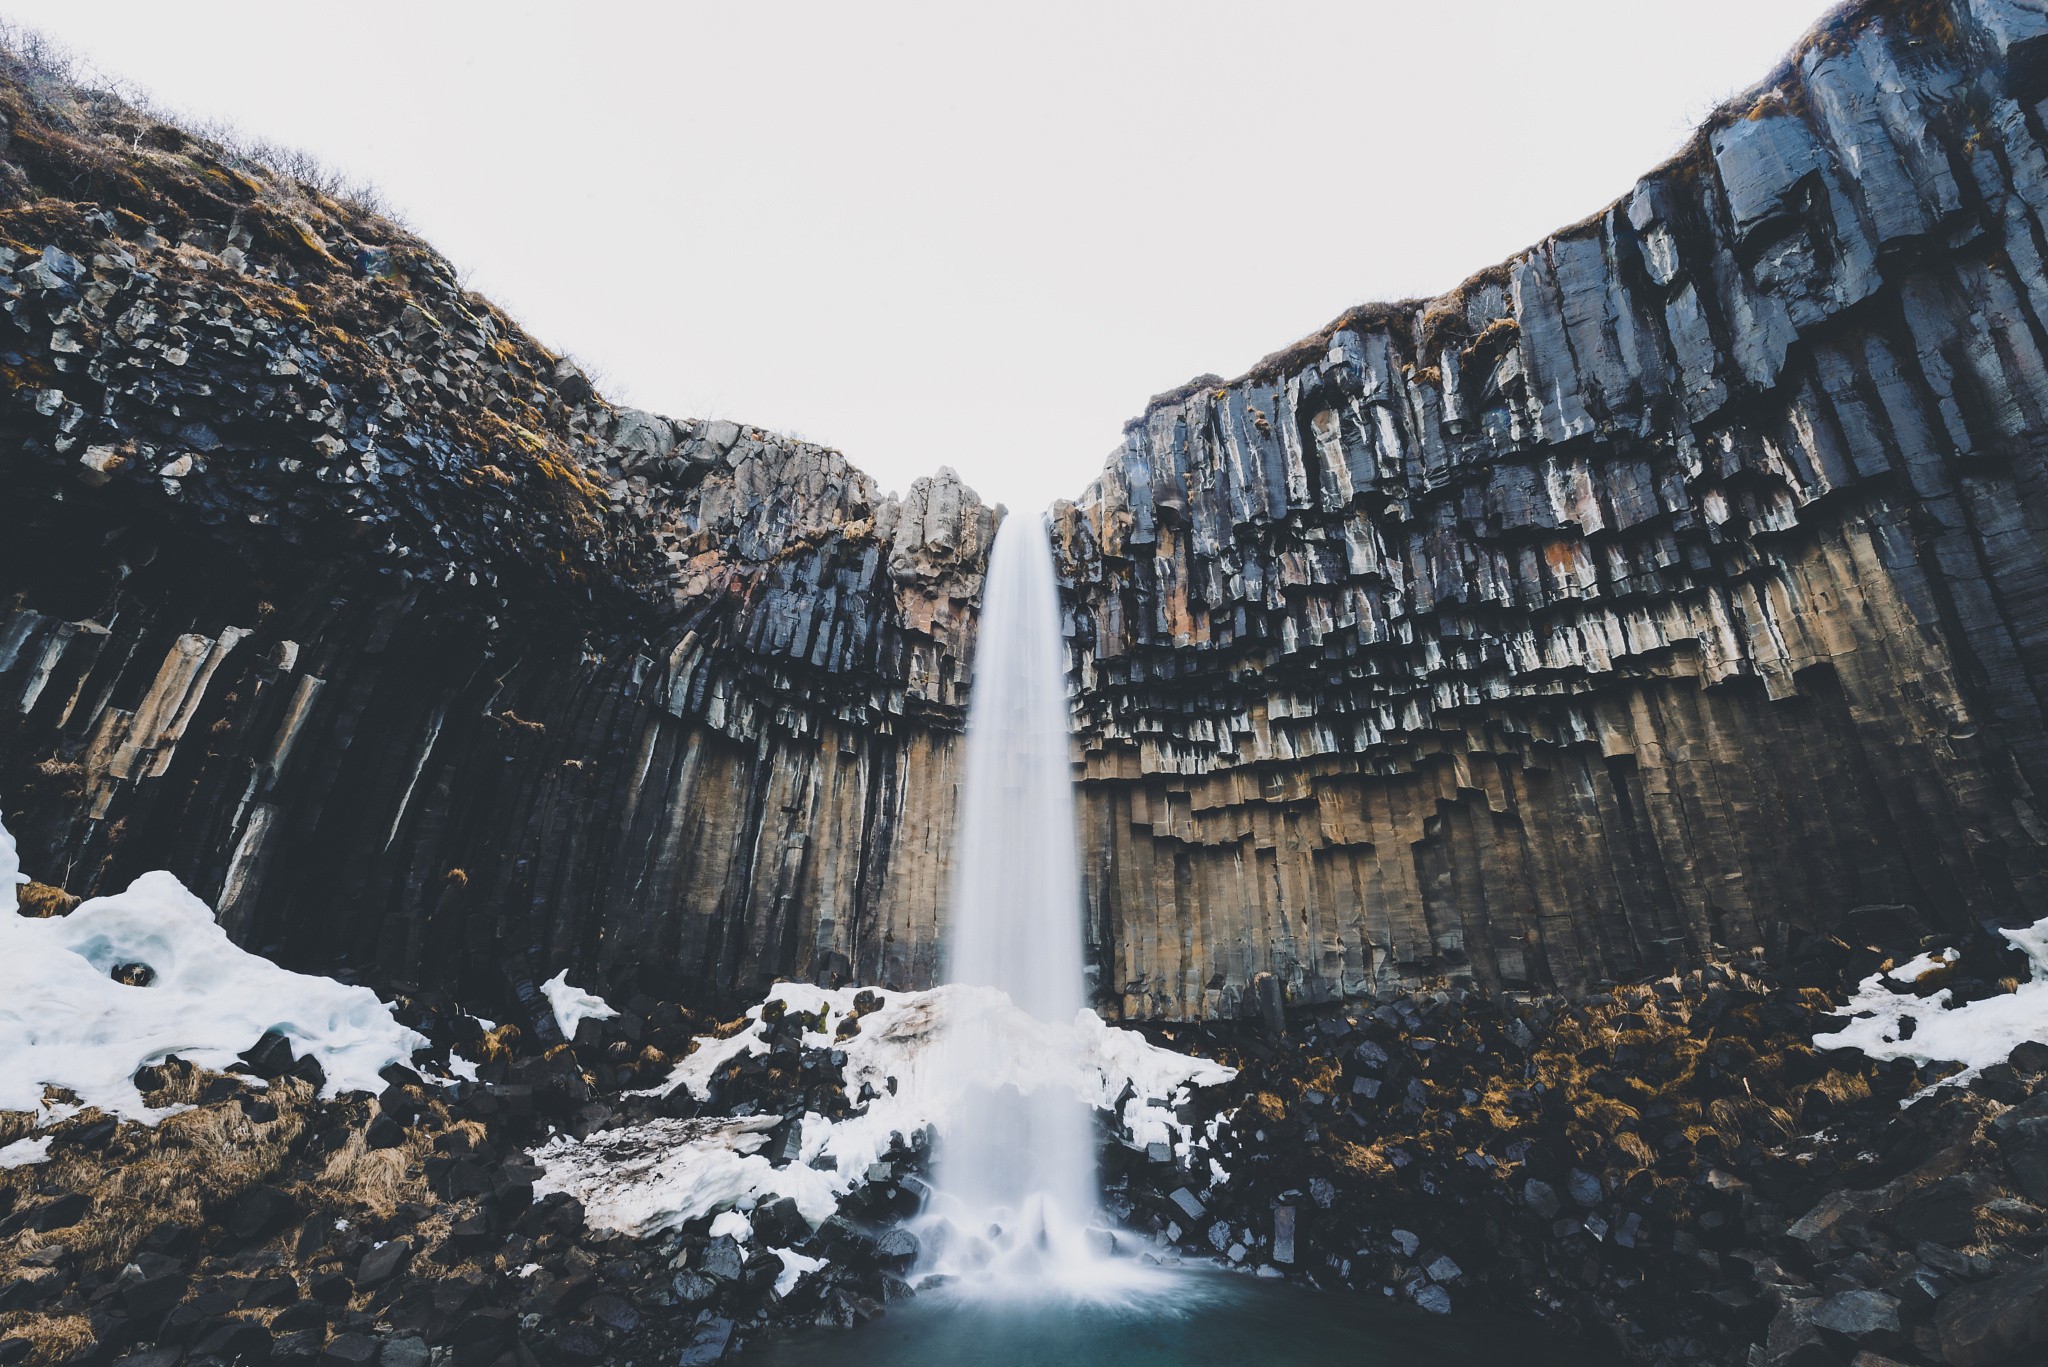 General 2048x1367 500px landscape photography waterfall Iceland nature rocks